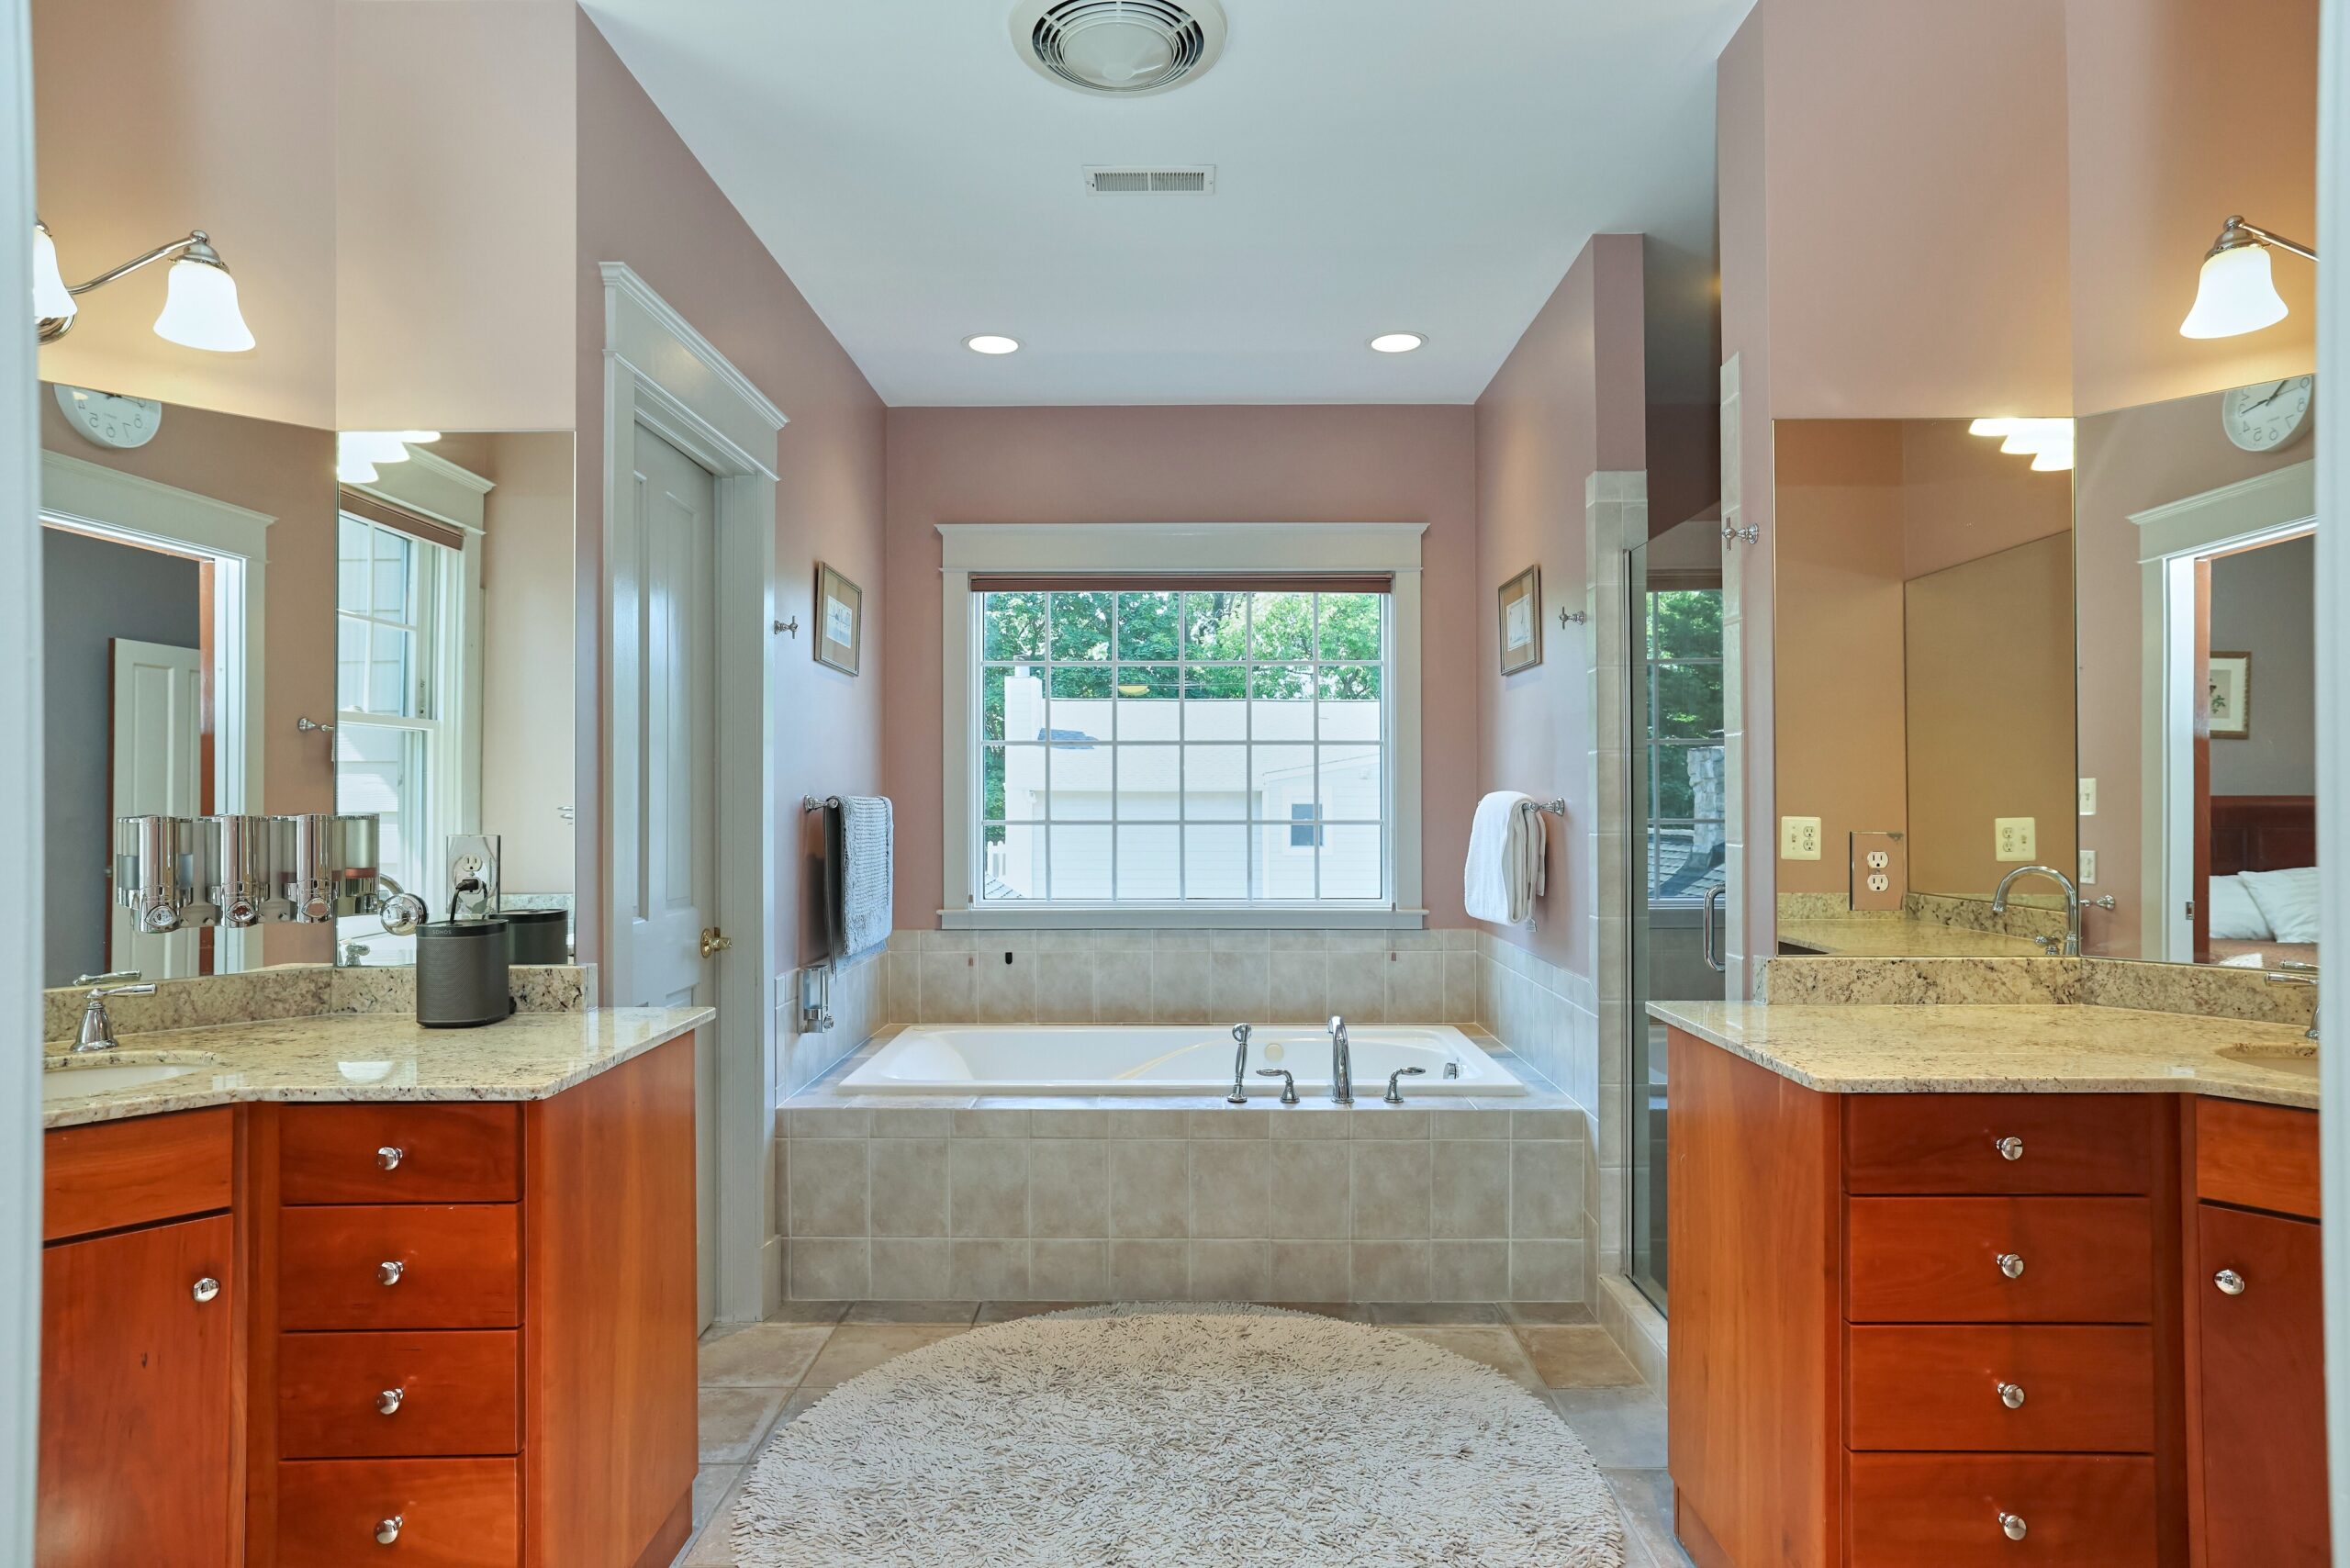 Professional interior photo of 819 N Fillmore St - Showing the primary bathroom with 2 individual vanities and a deep soaking tub visible toward the back